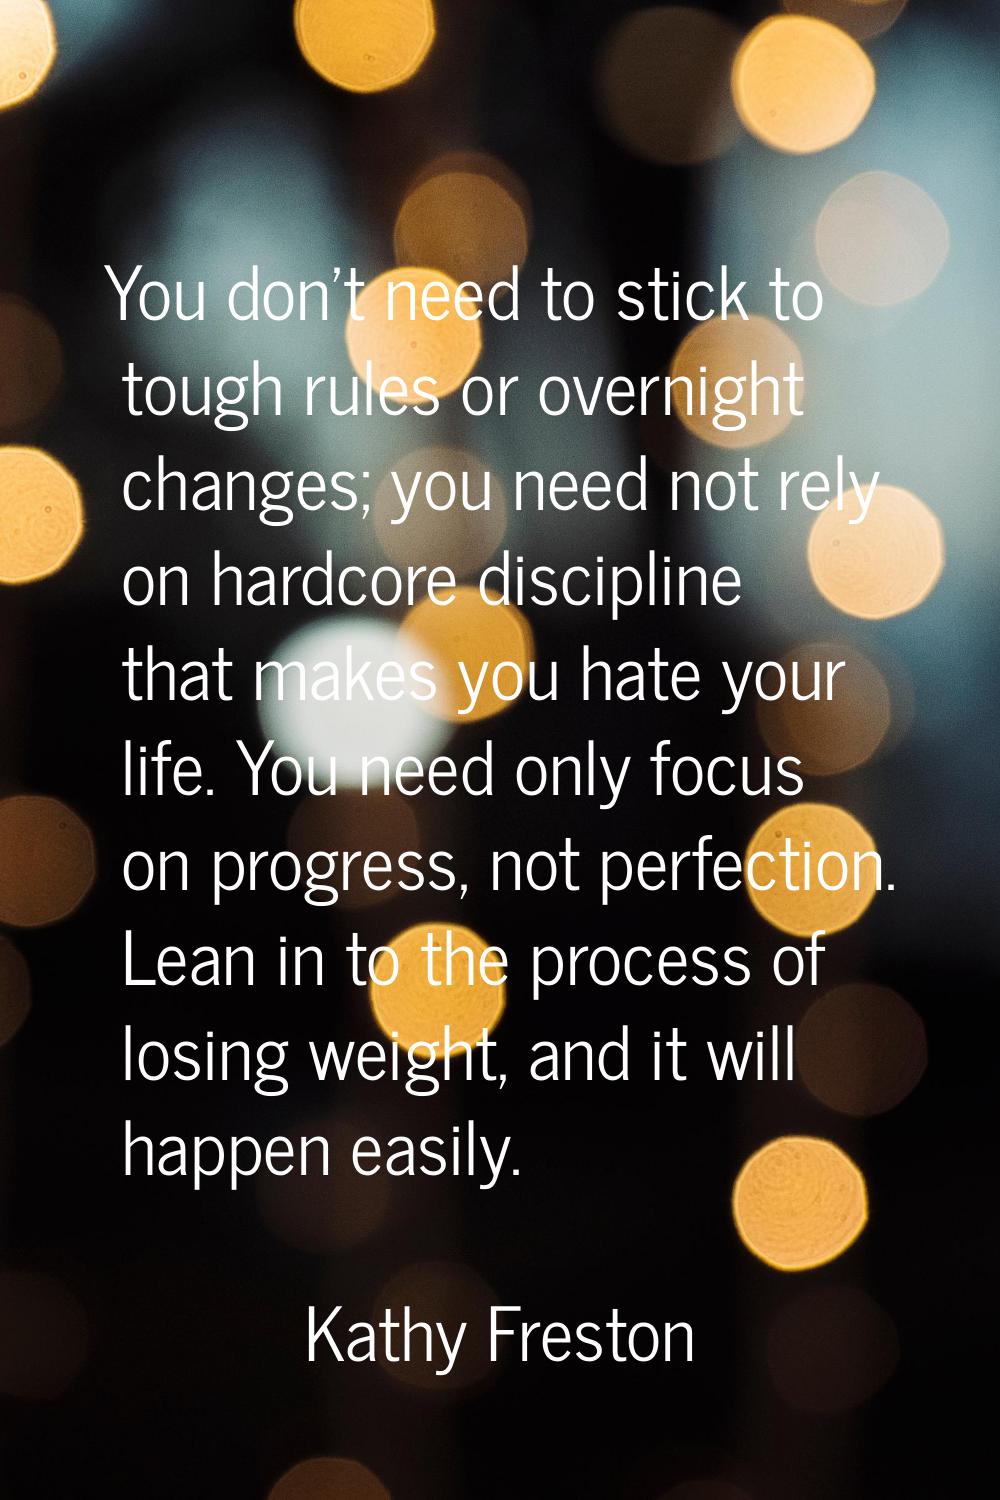 You don't need to stick to tough rules or overnight changes; you need not rely on hardcore discipli